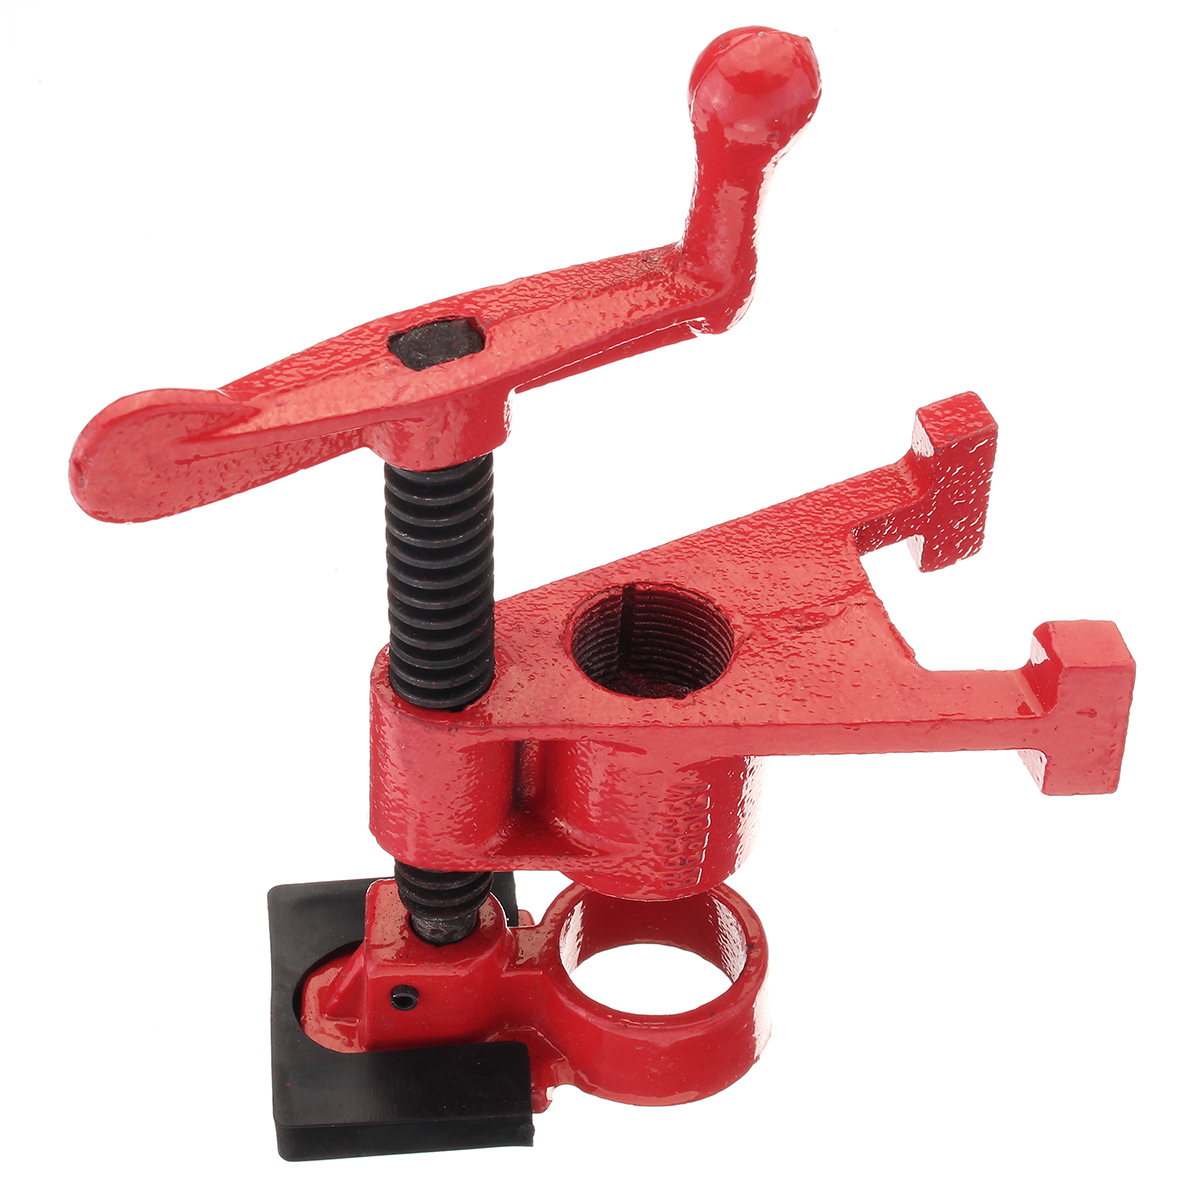 

1/2 3/4Inch Wood Gluing Pipe Clamp Heavy Duty Profesional Wood Working Cast Iron Carpenter's Clamp